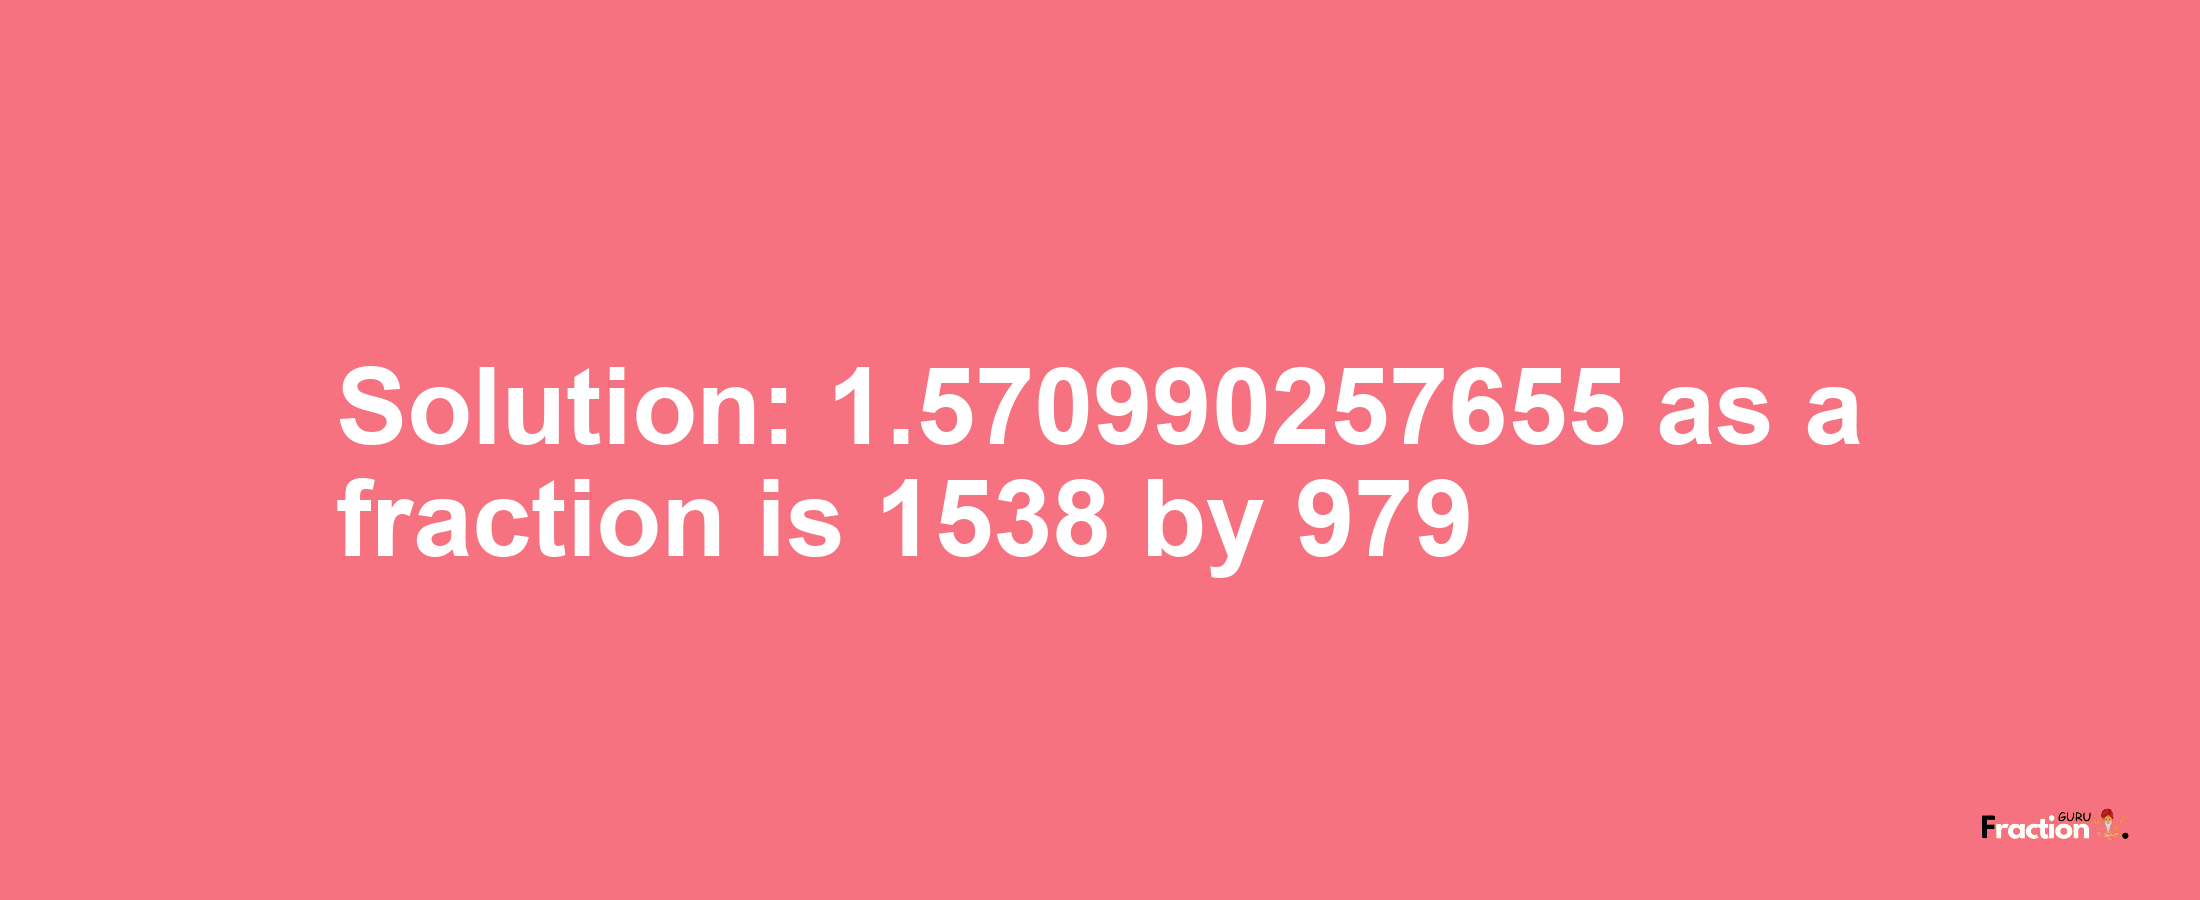 Solution:1.570990257655 as a fraction is 1538/979